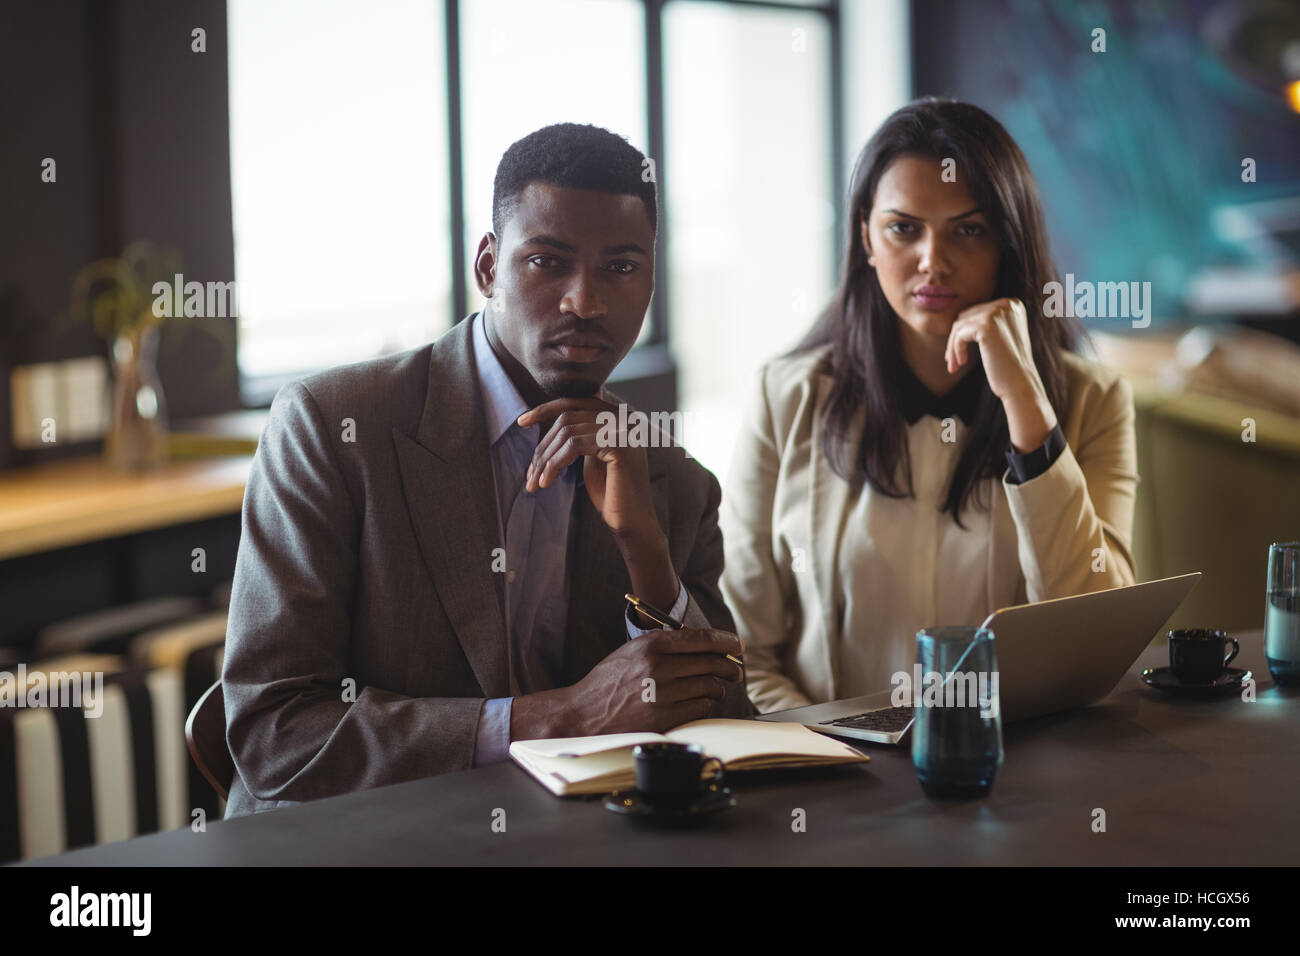 Businessman and a colleague at desk Stock Photo